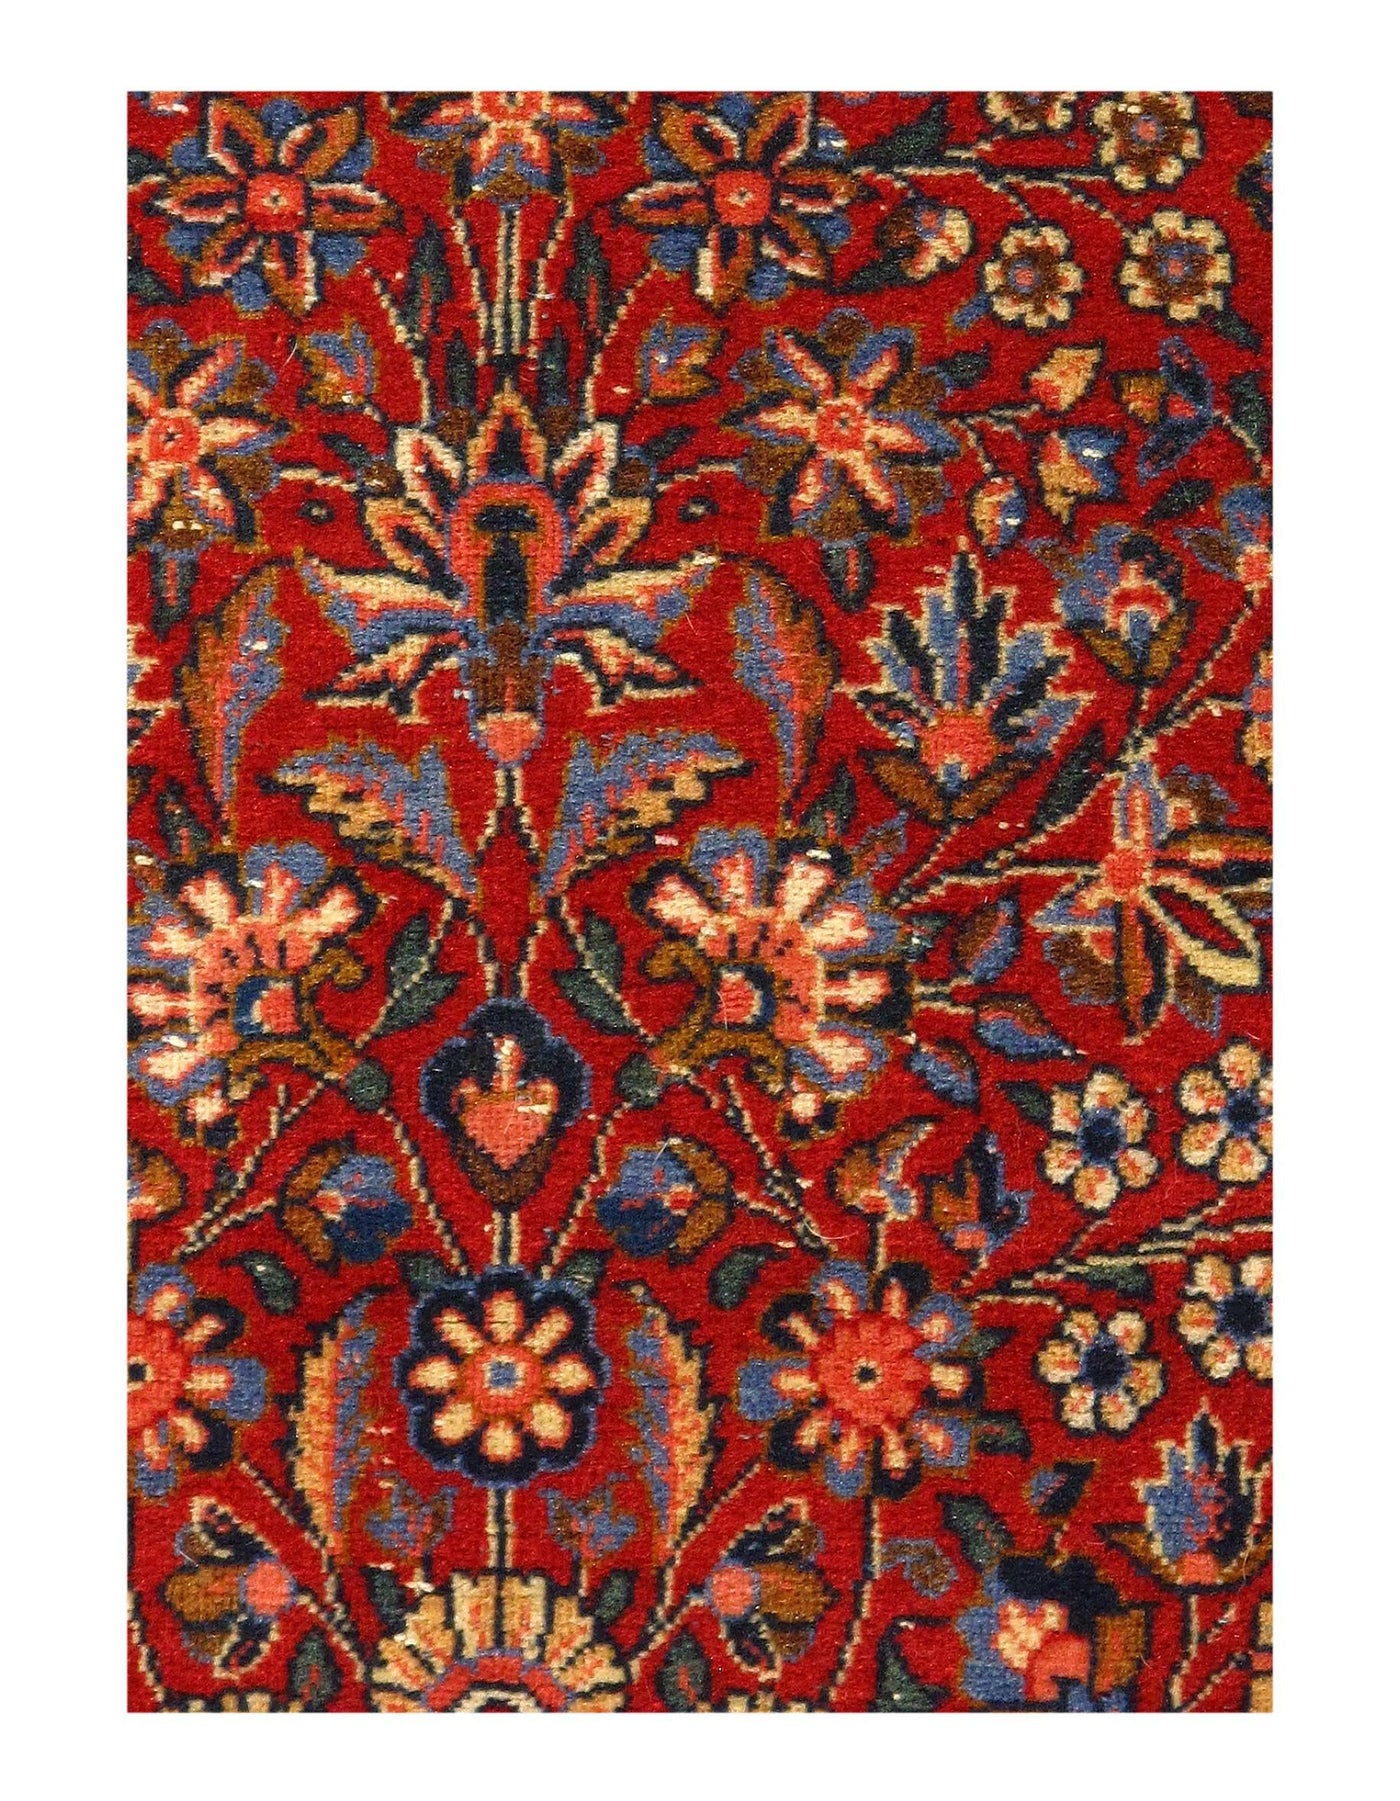 Canvello Persian Antique Red Kashan Rug - 4'5'' X 6'11''